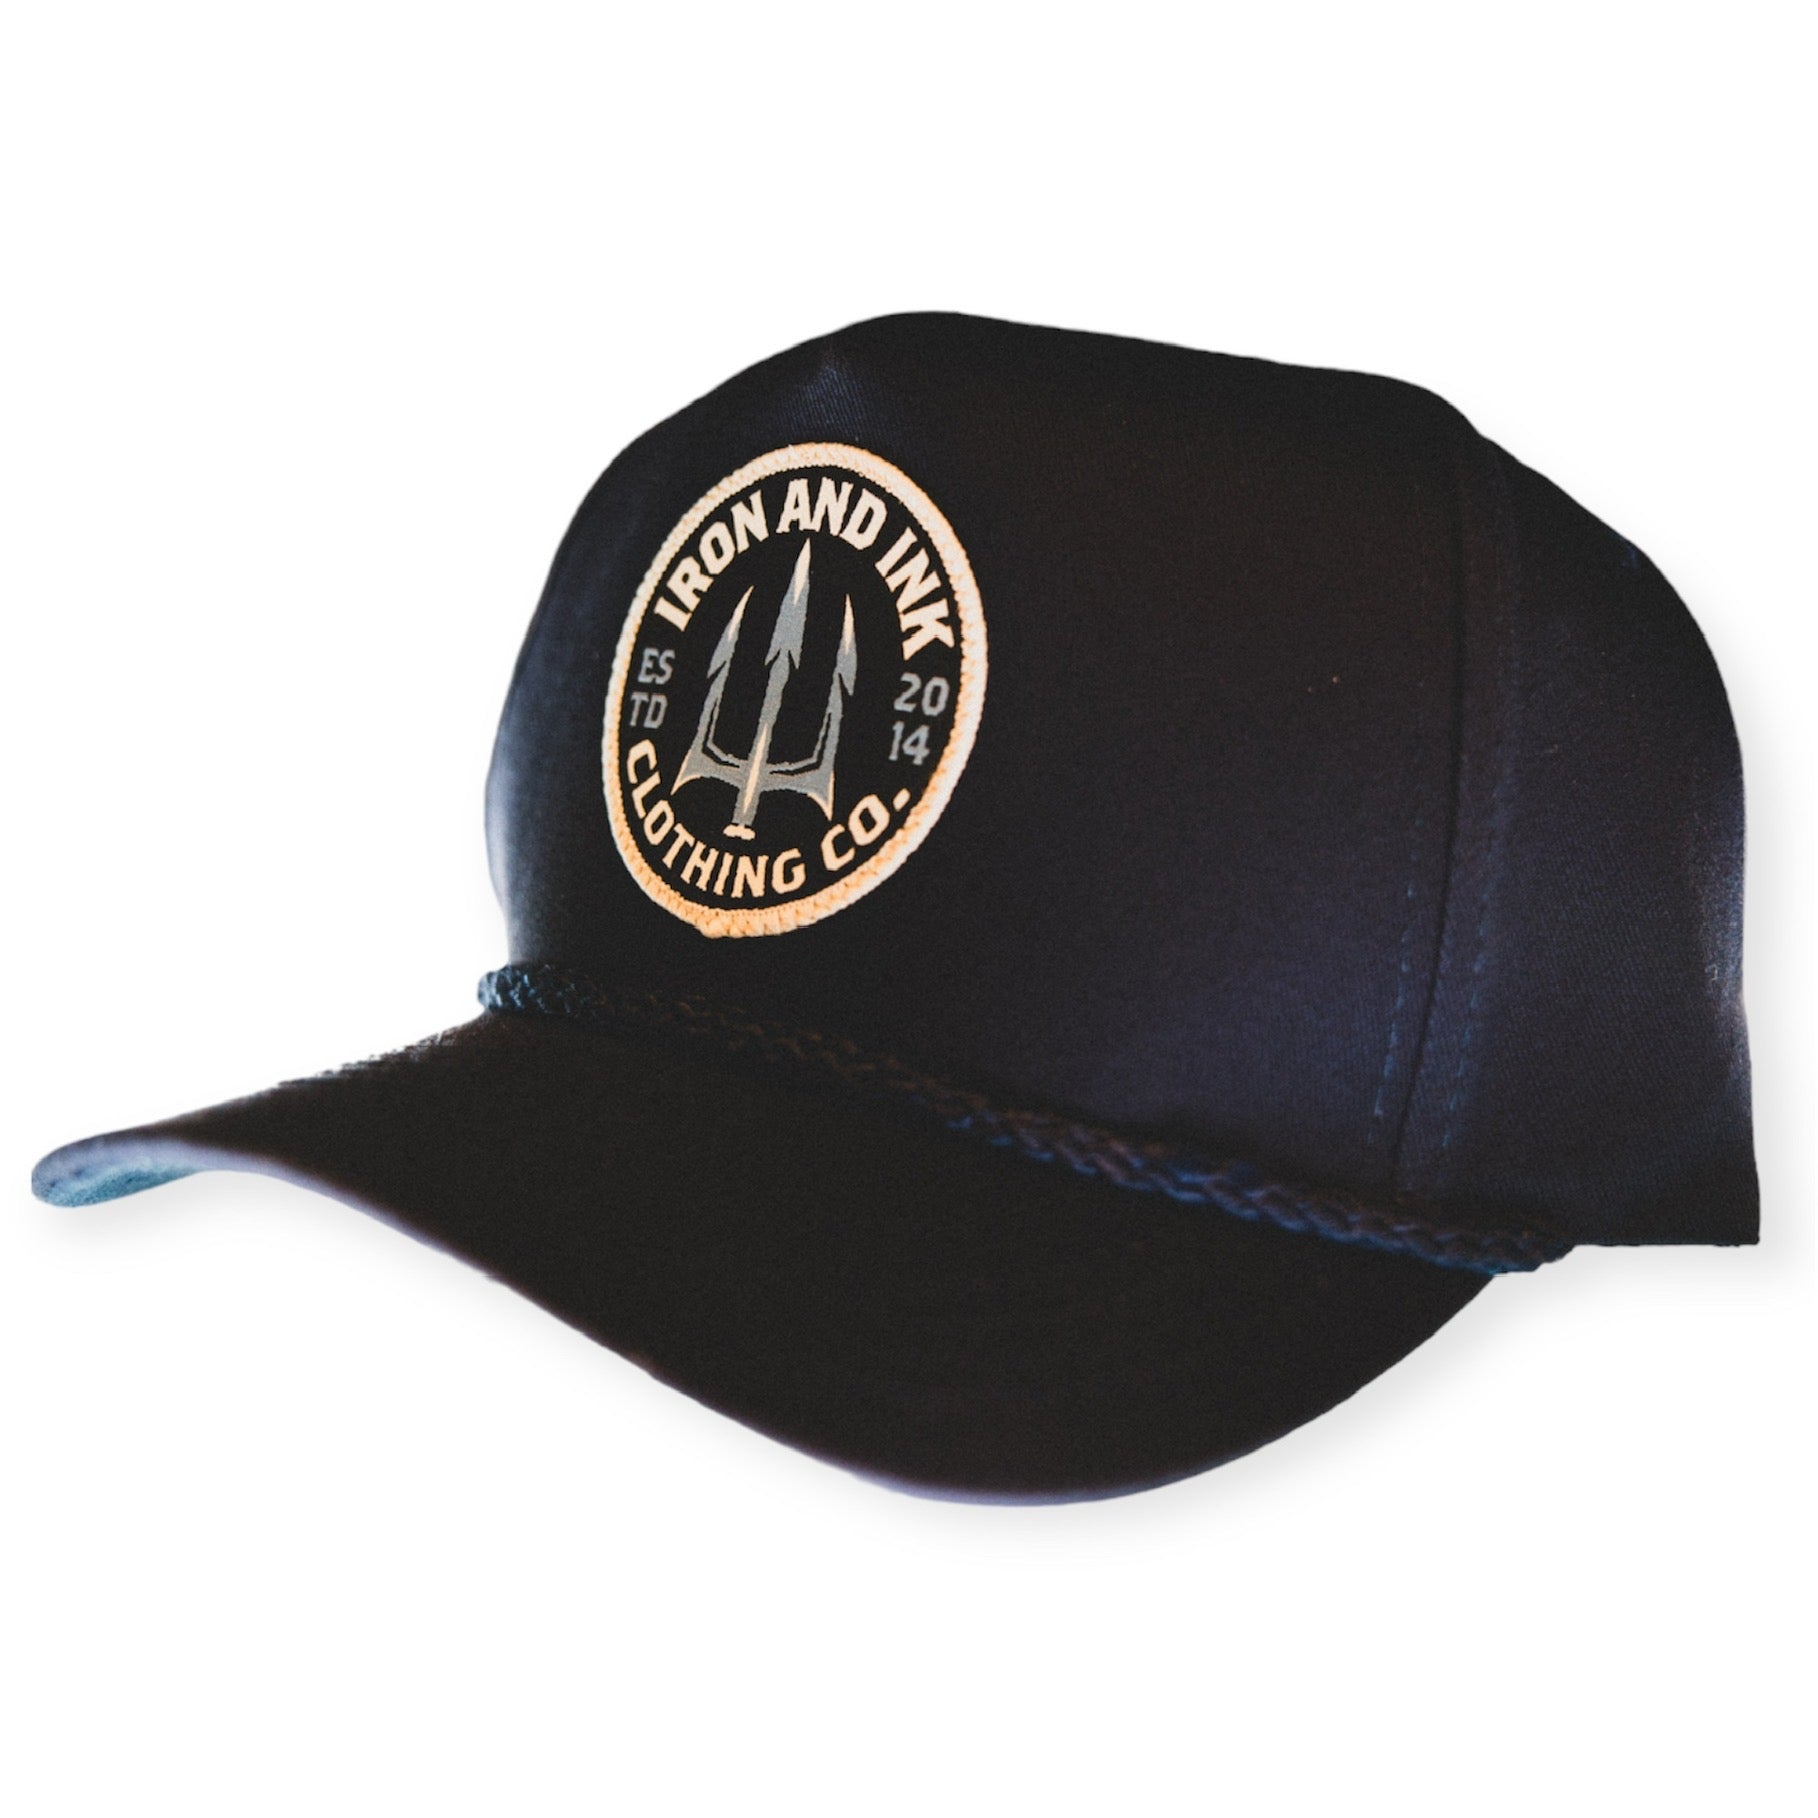 Trident rope SnapBack-Navy with navy